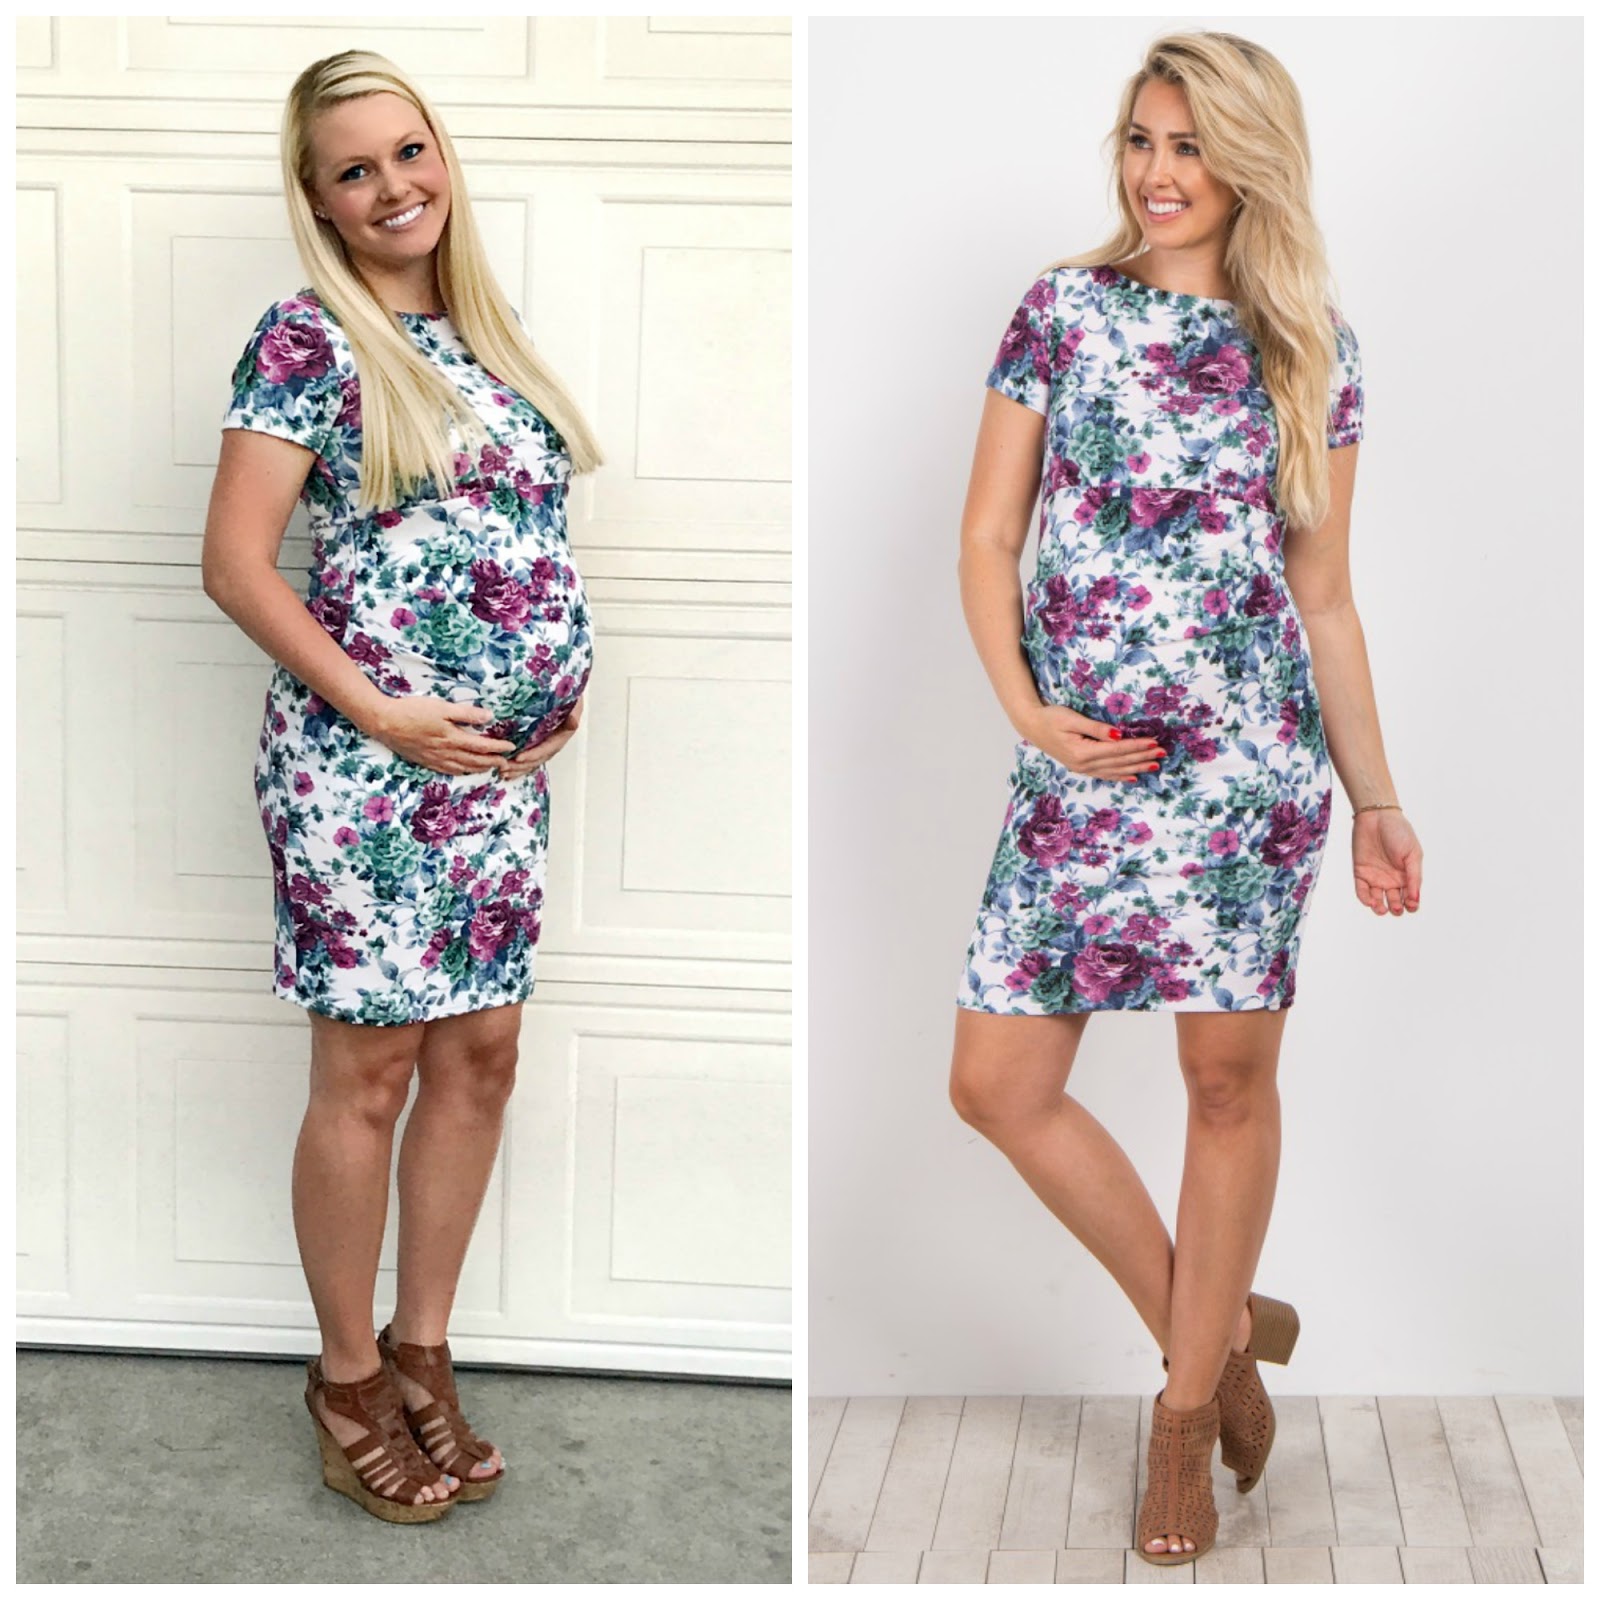 Showered With Design: Shop PinkBlush Maternity Dress